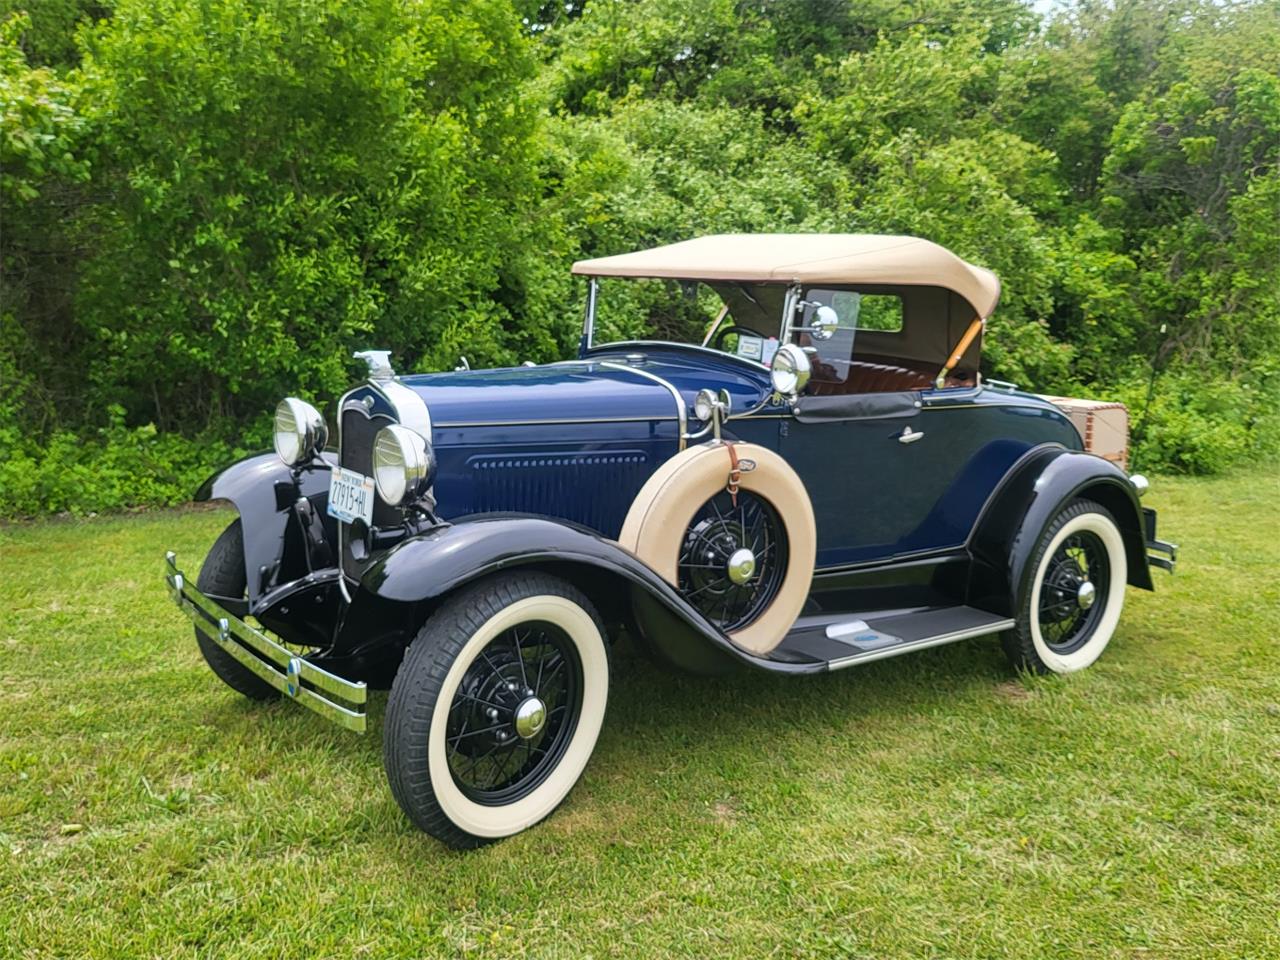 1931 Ford Model A Roadster in Freeport, Long Island, New York